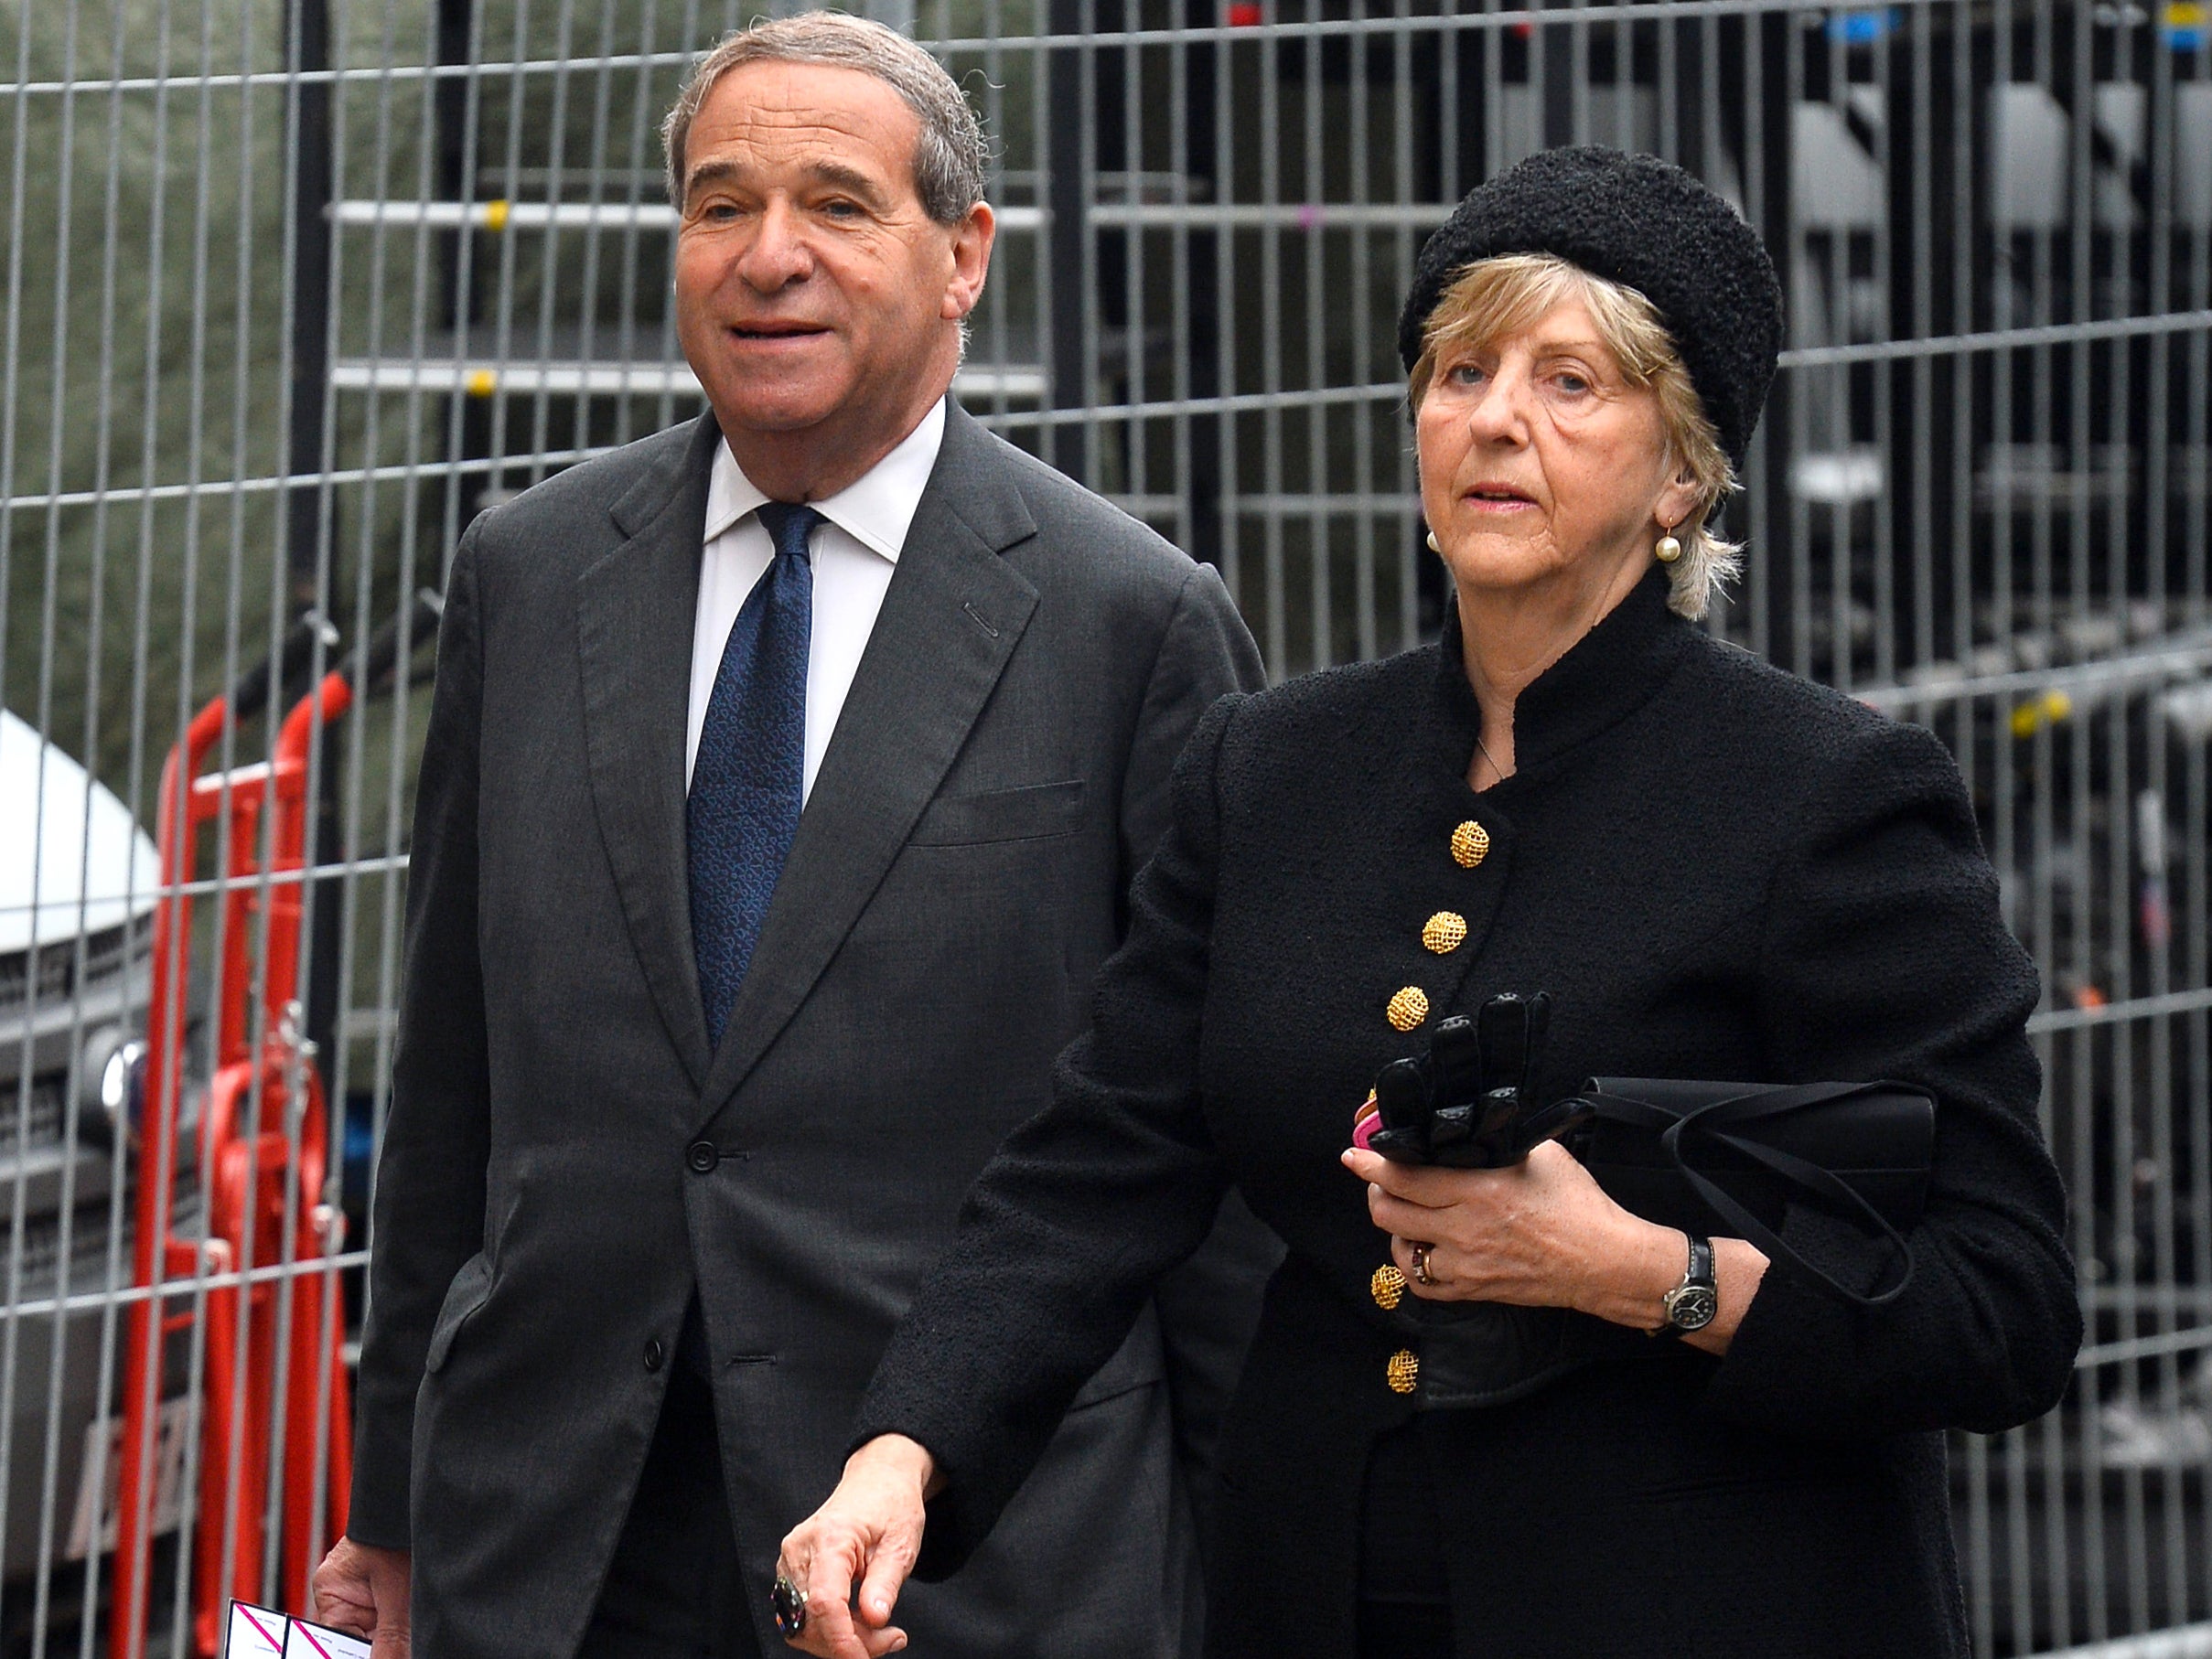 Leon Brittan, and his wife, Diana, who says Scotland Yard should be held accountable